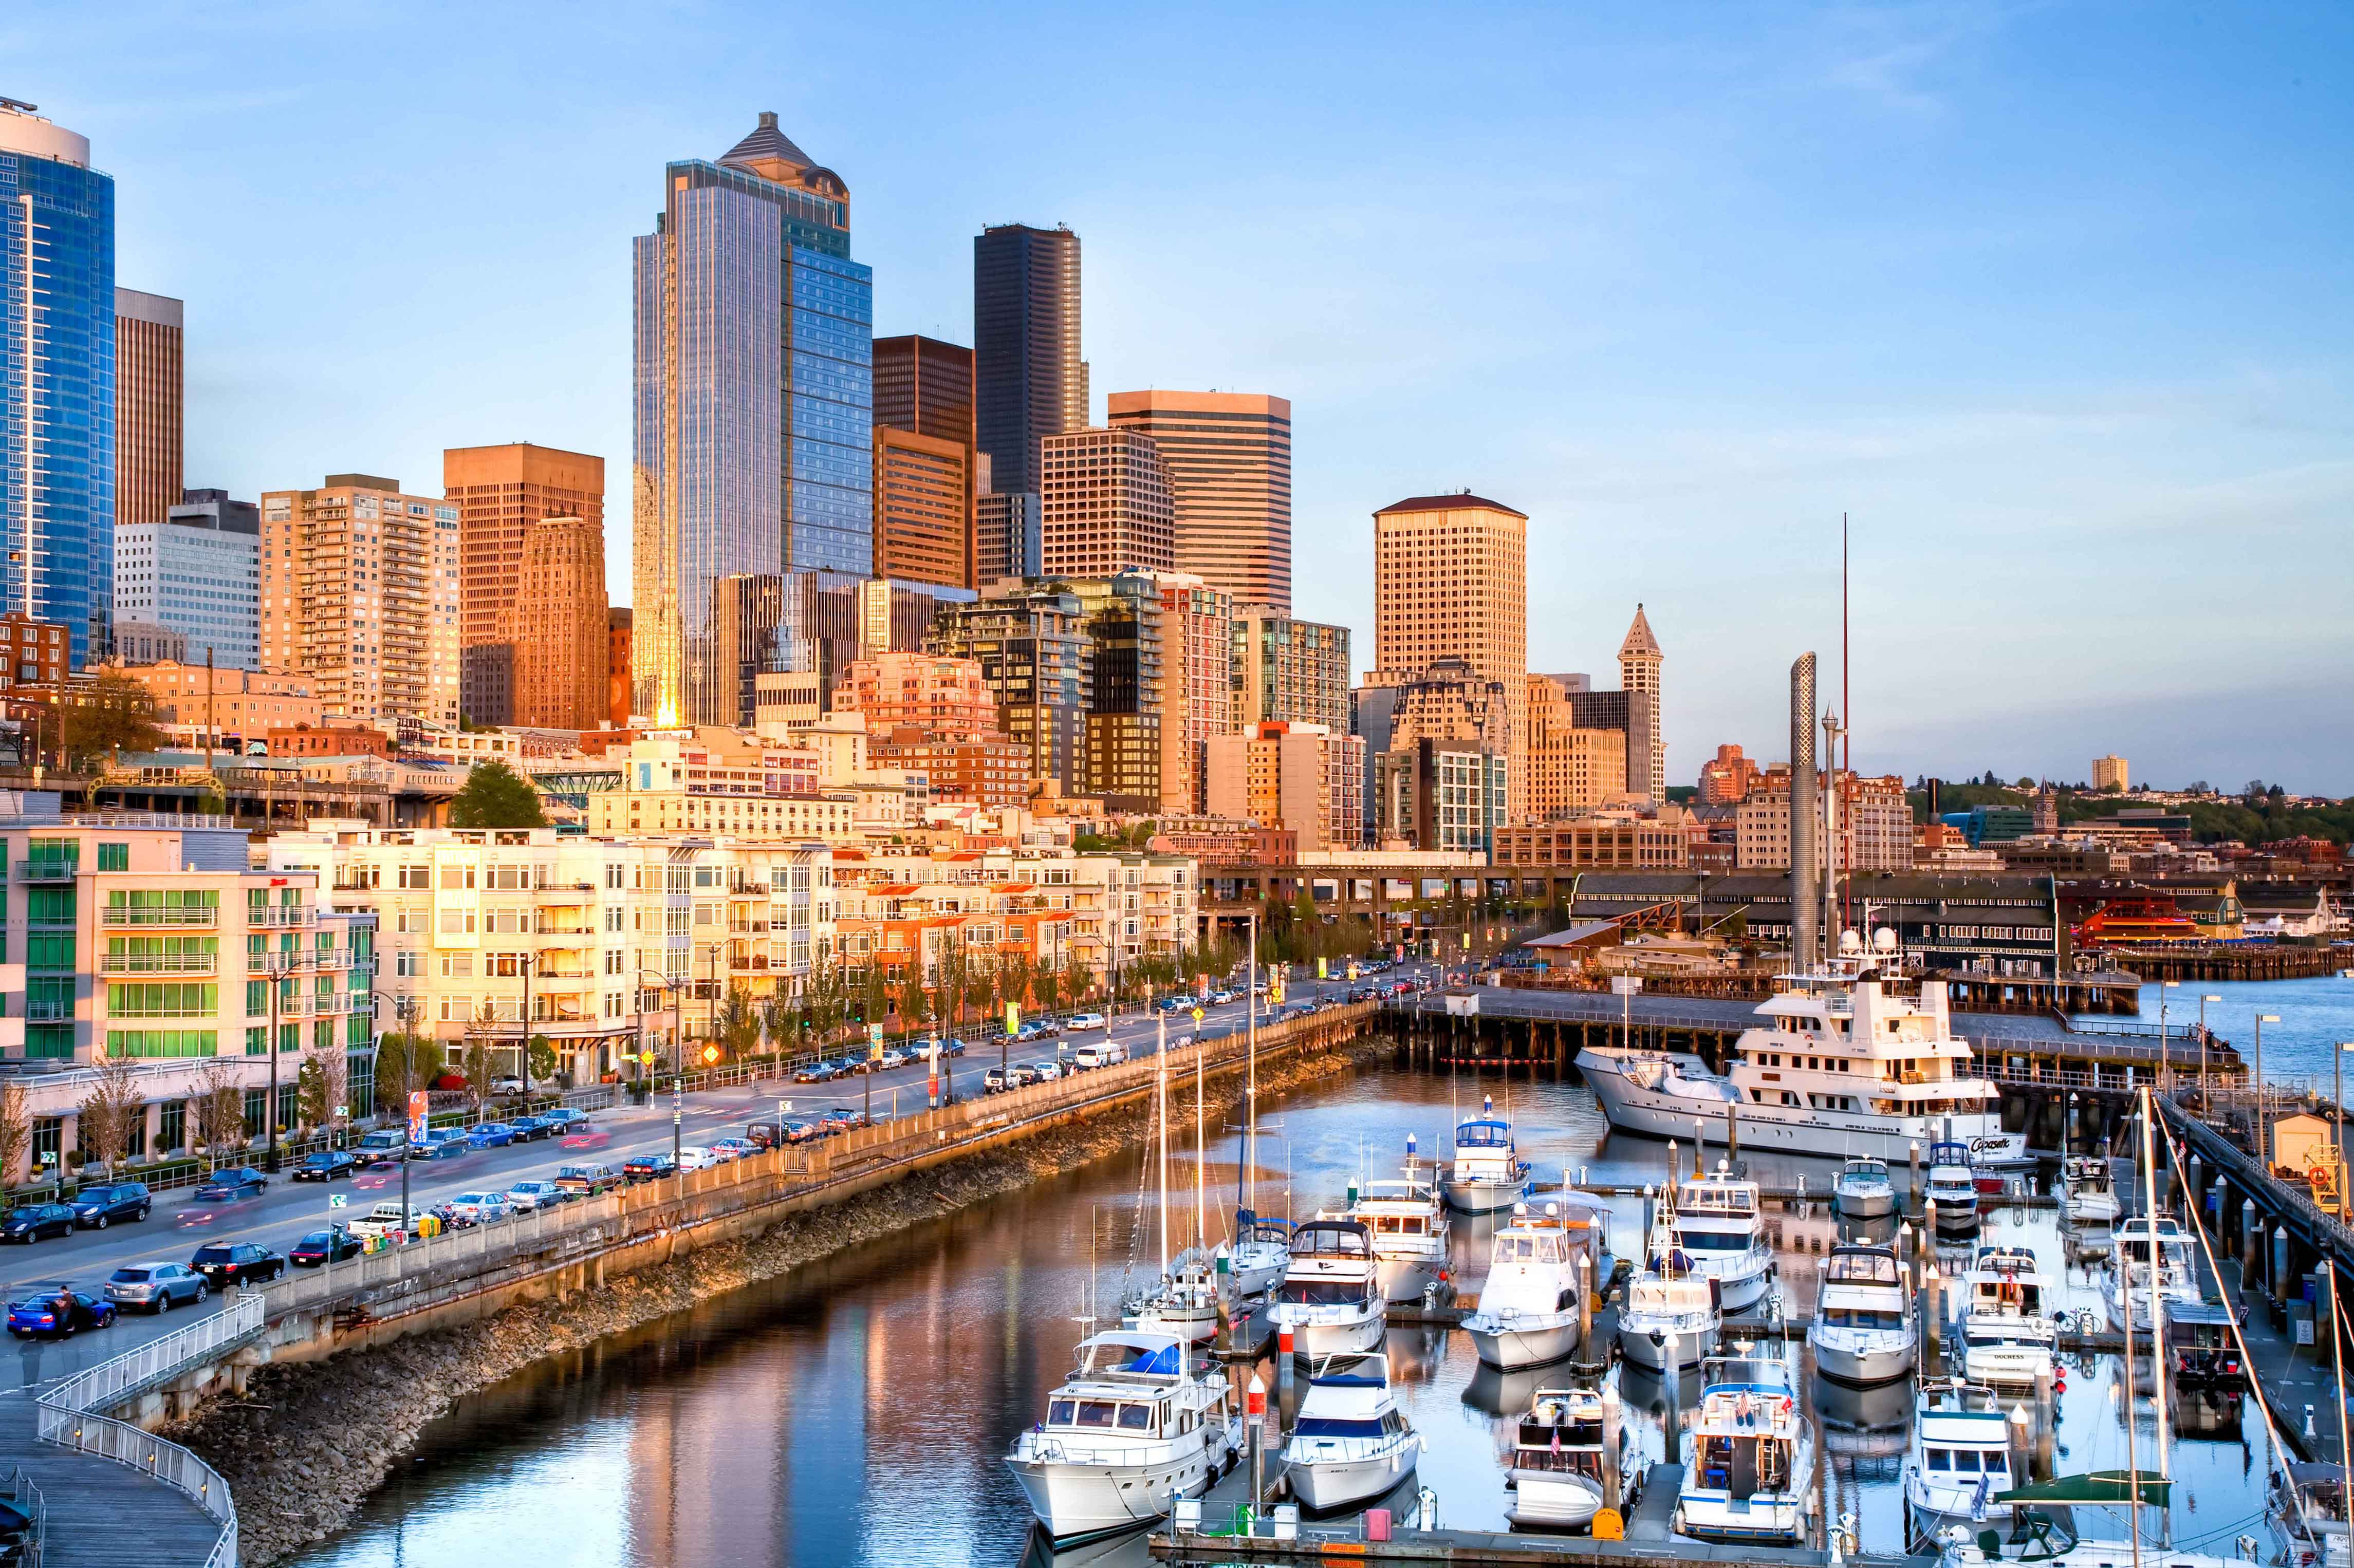 View of the waterfront with sail boats anchored along the dock and views of the city at a golden sunset hour in Seattle, Washington